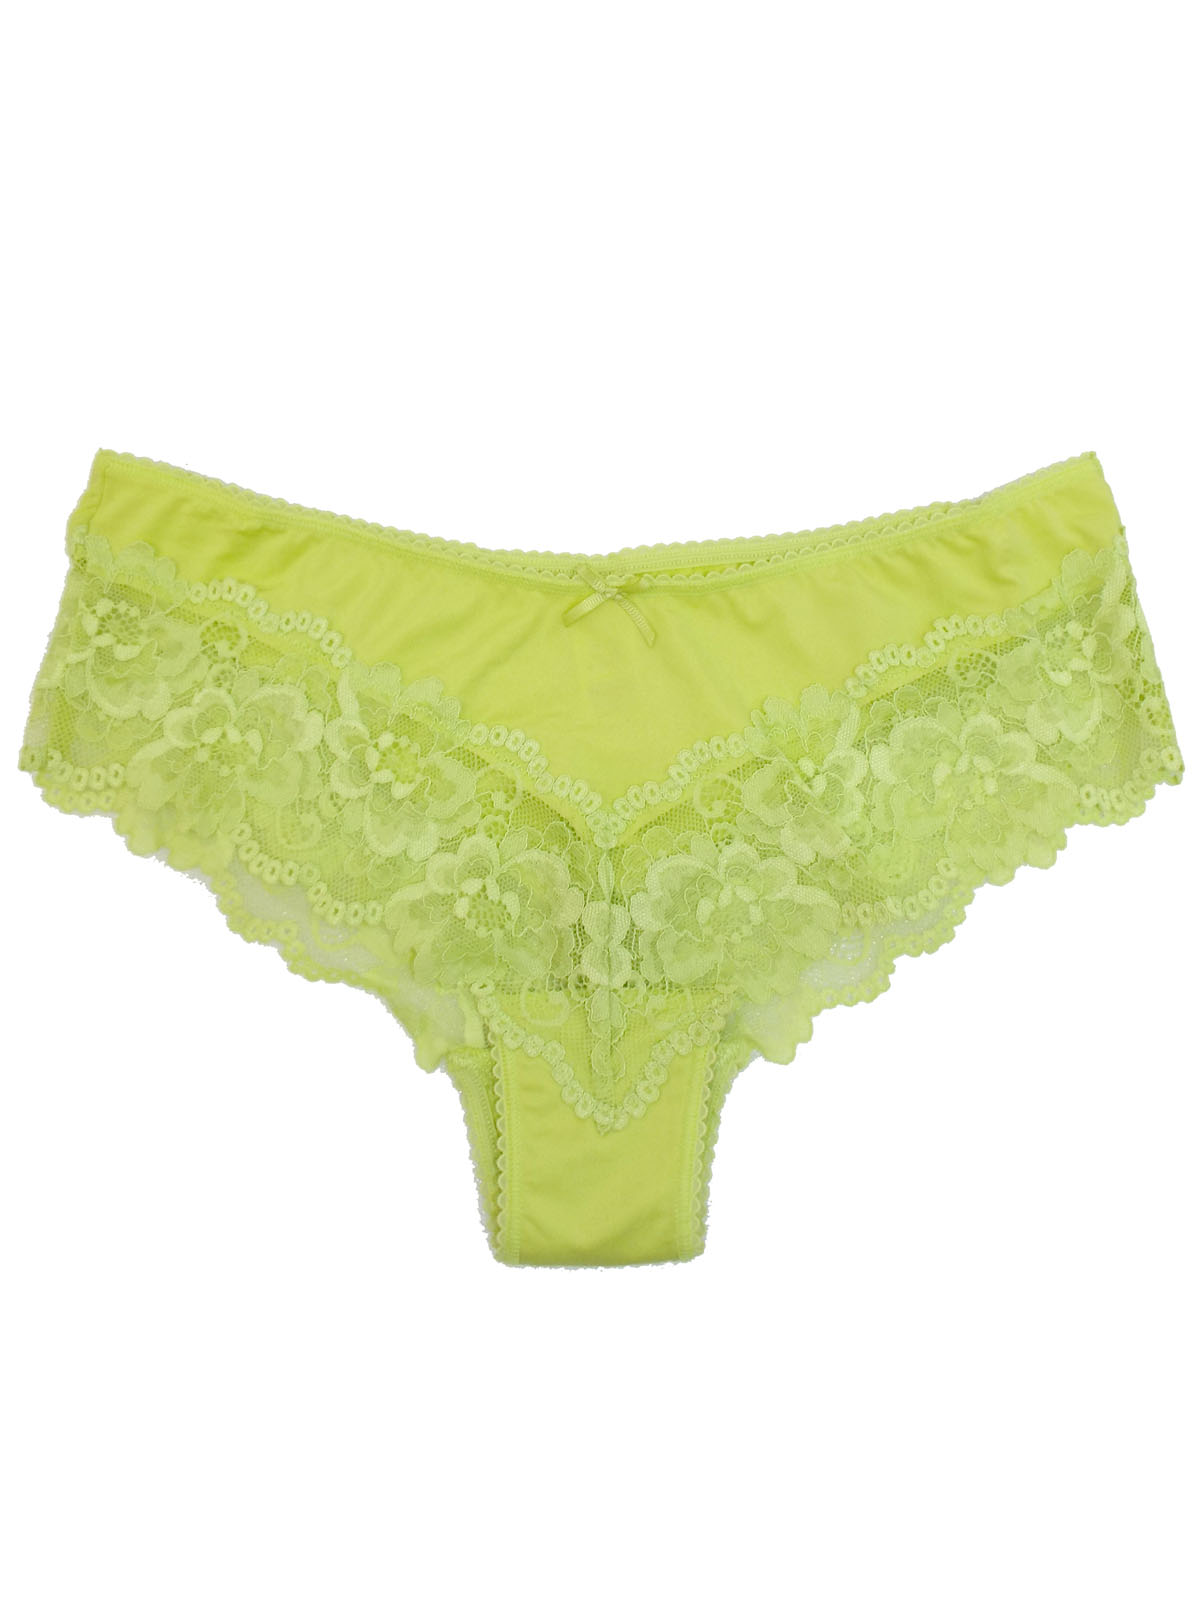 Marks and Spencer - - M&5 SOFT-LIME Lace Brazilian Knickers - Size 6 to 12